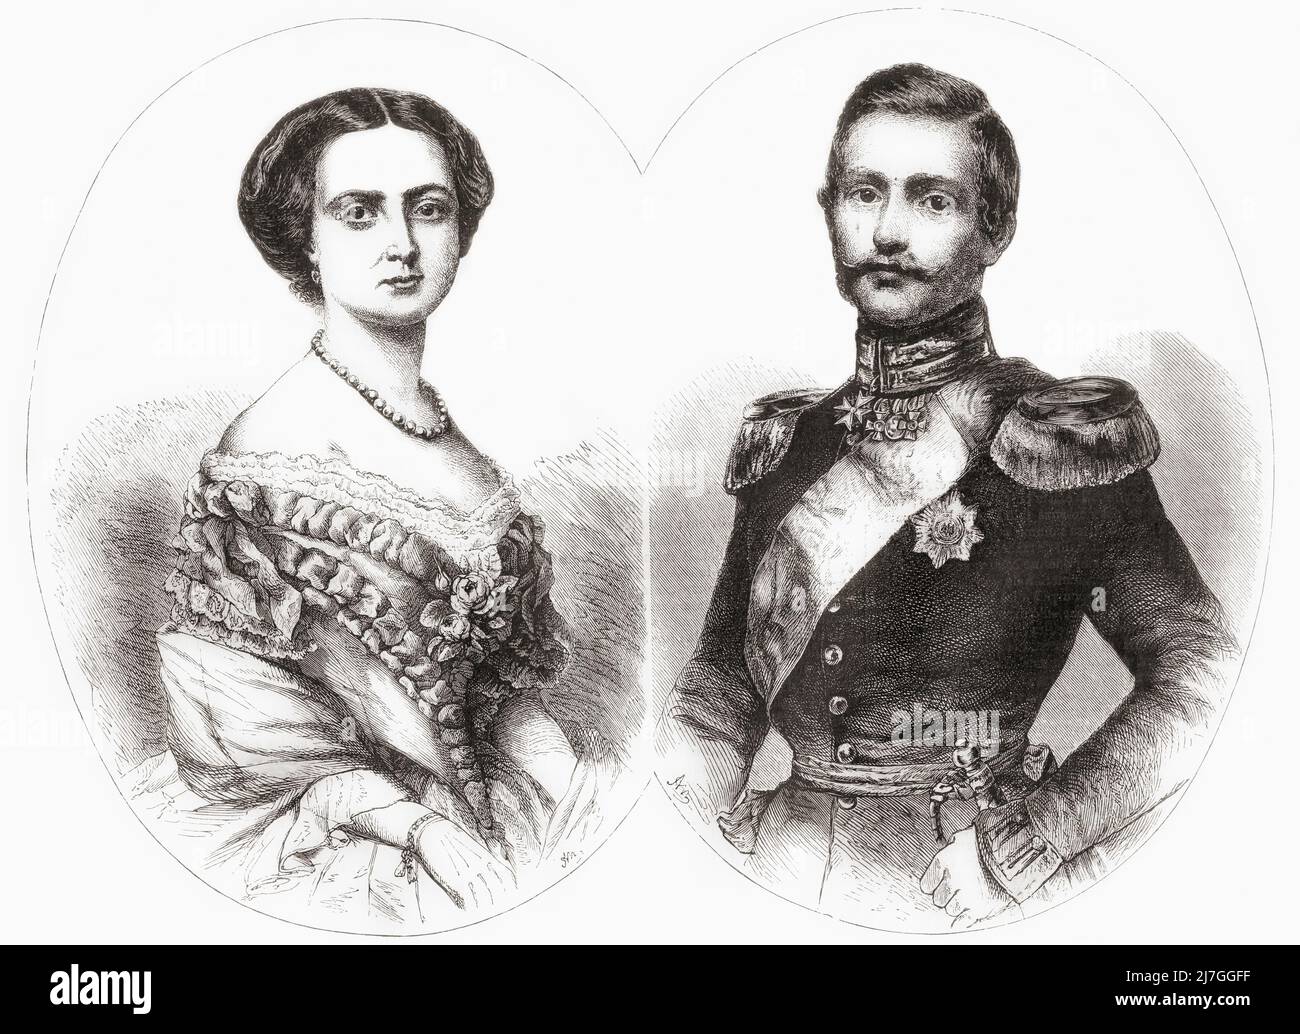 Frederick III, 1831 – 1888, aka Friedrich III. German Emperor and King of Prussia.  Victoria, Princess Royal, 1840 –1901. German Empress and Queen of Prussia as the wife of German Emperor Frederick III.  From L'Univers Illustre, published Paris, 1859 Stock Photo